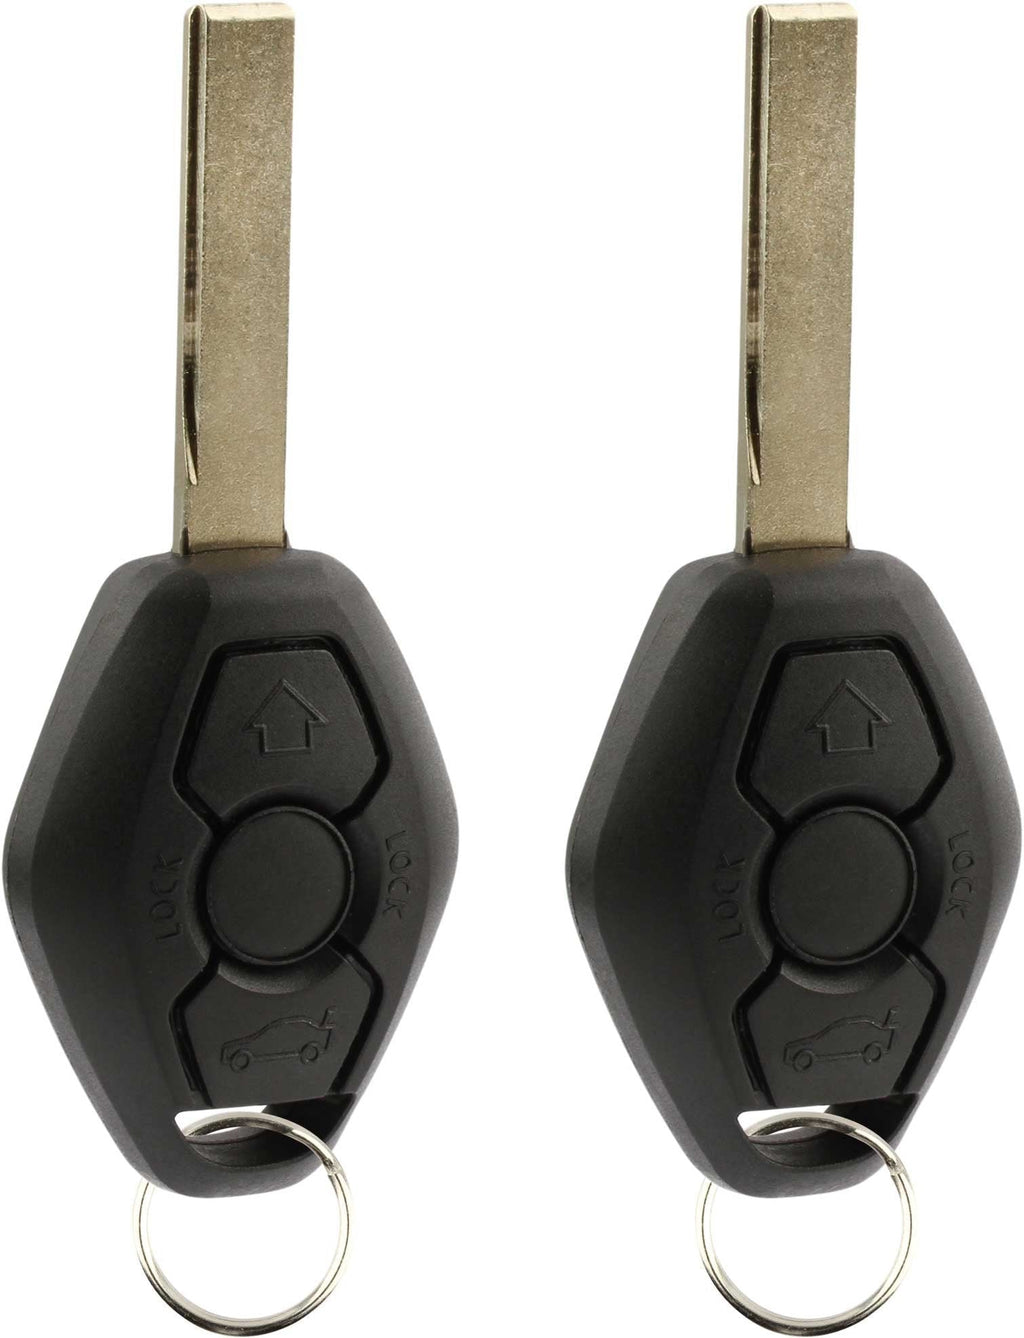  [AUSTRALIA] - KeylessOption Keyless Entry Remote Control Car Key Fob Smooth Style Replacement for LX8 FZV (Pack of 2)